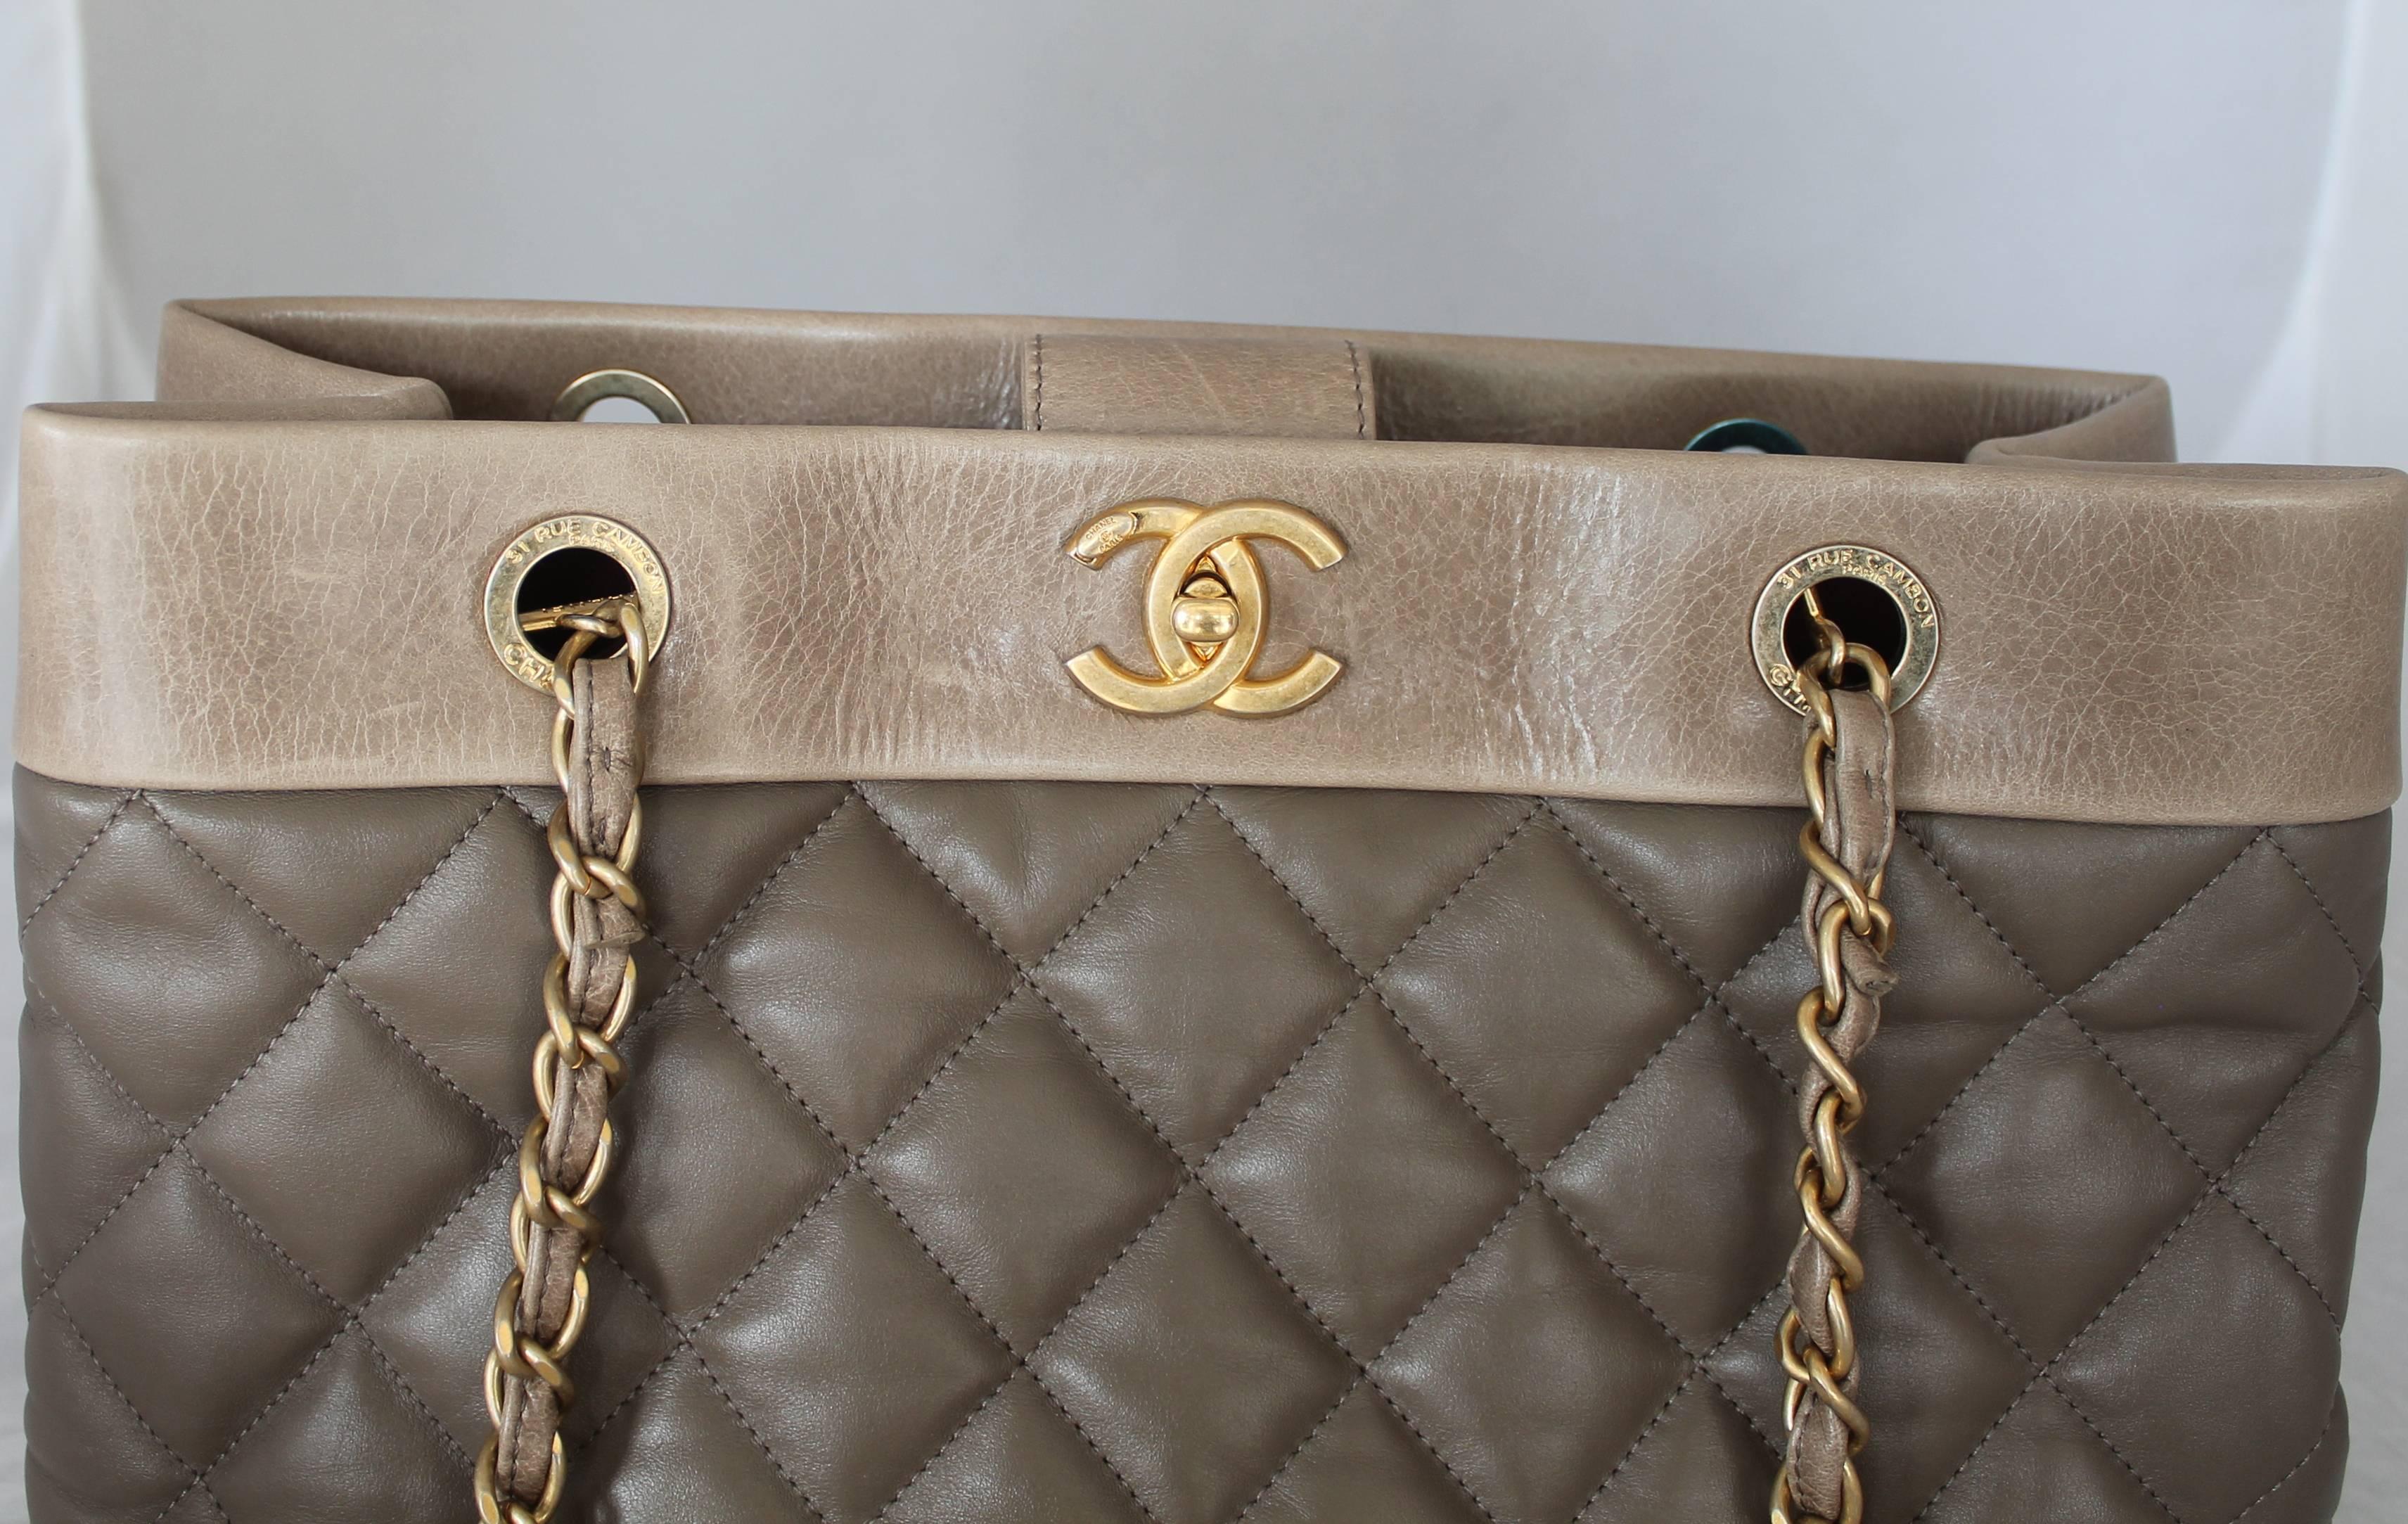 Chanel 2013 Taupe Soft Elegance Tote Shoulder Bag - GHW. This quilted bag is in excellent condition  and has a plum colored lining. It comes with the duster and box. It has 3 different compartments with the center section having a zipper. The